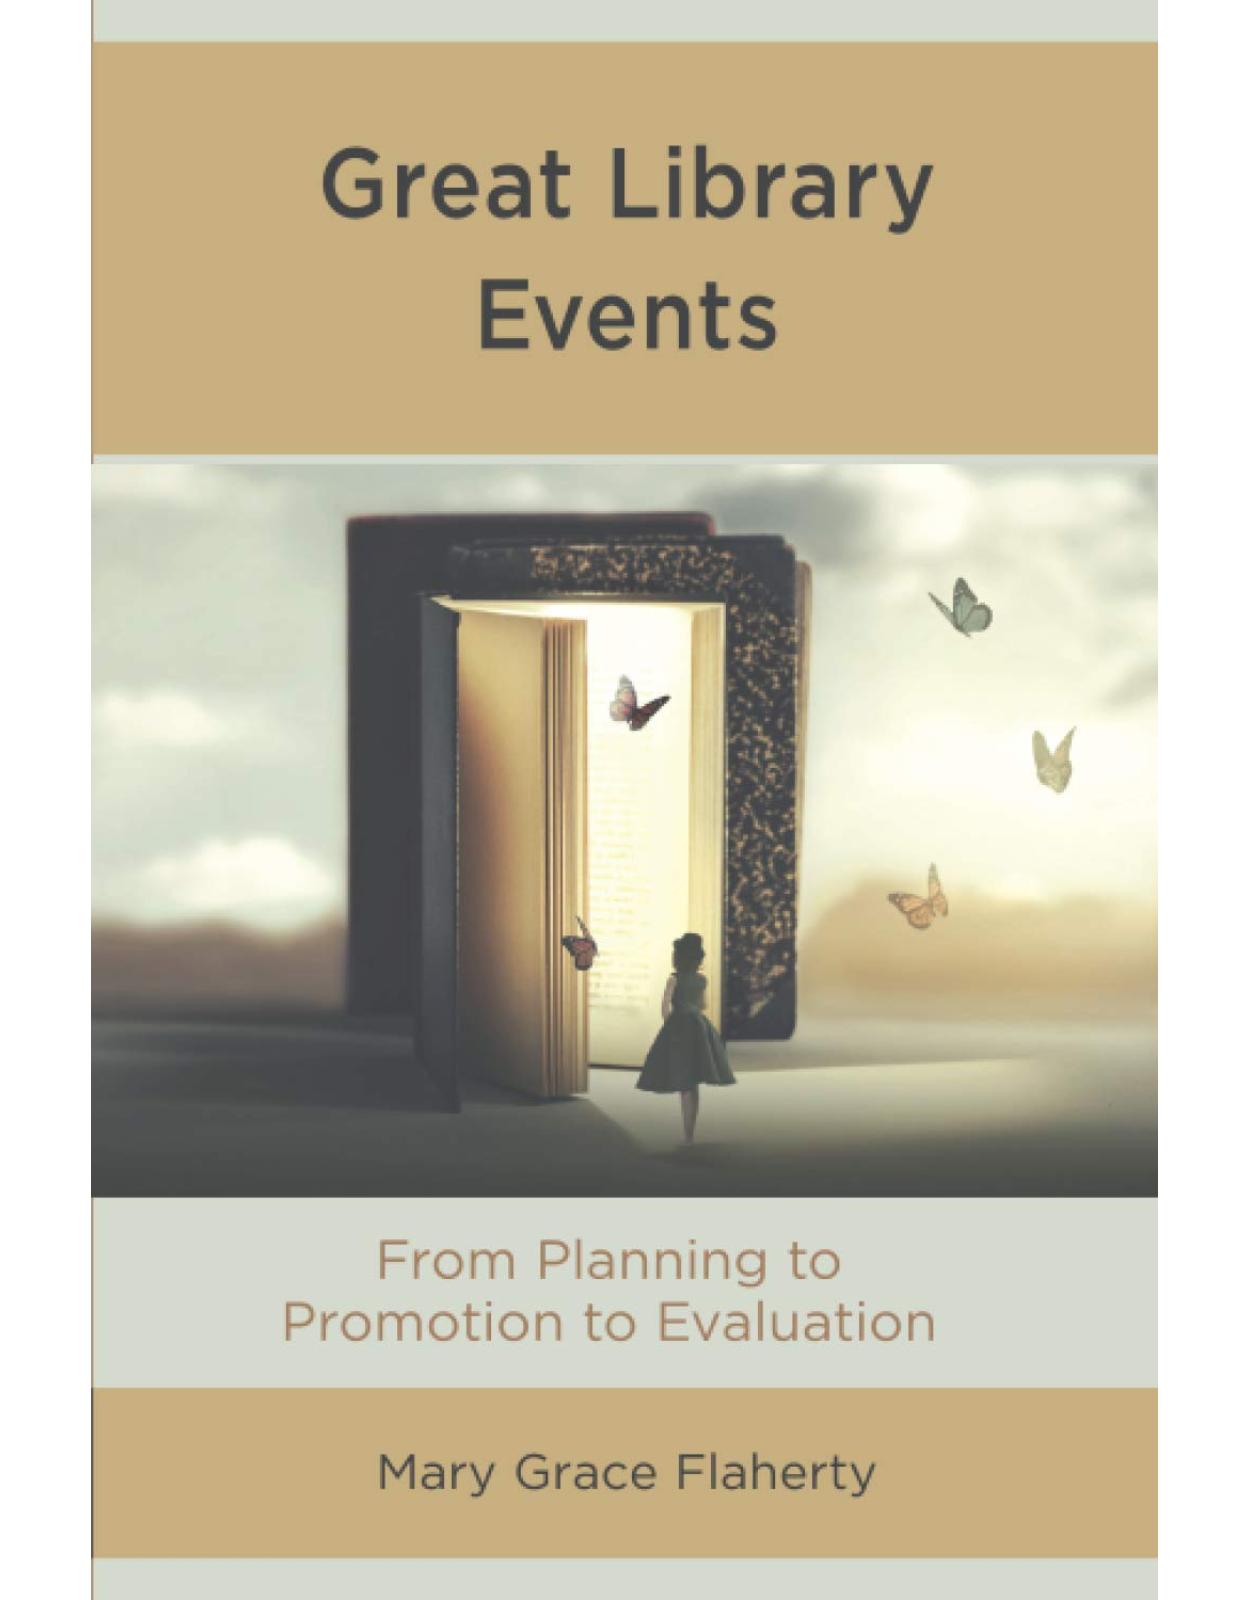 Great Library Events: From Planning to Promotion to Evaluation